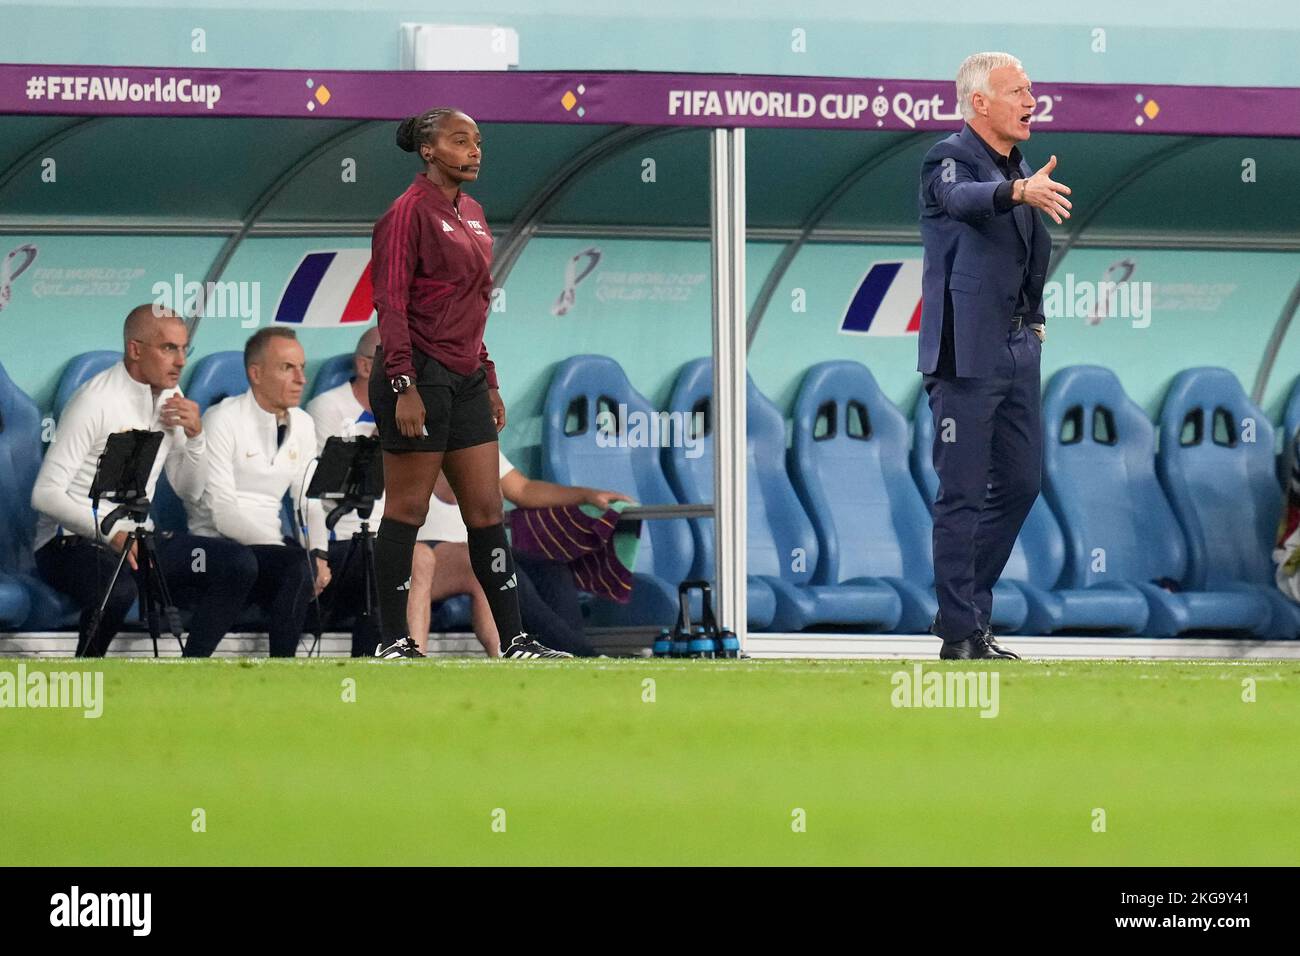 Al Wakrah, Qatar. 22nd Nov, 2022. Fourth Official Salima Mukansanga (L) and Didier Deschamps, head coach of France, are seen during the Group D match between France and Australia of the 2022 FIFA World Cup at Al Janoub Stadium in Al Wakrah, Qatar, Nov. 22, 2022. Credit: Meng Yongmin/Xinhua/Alamy Live News Stock Photo